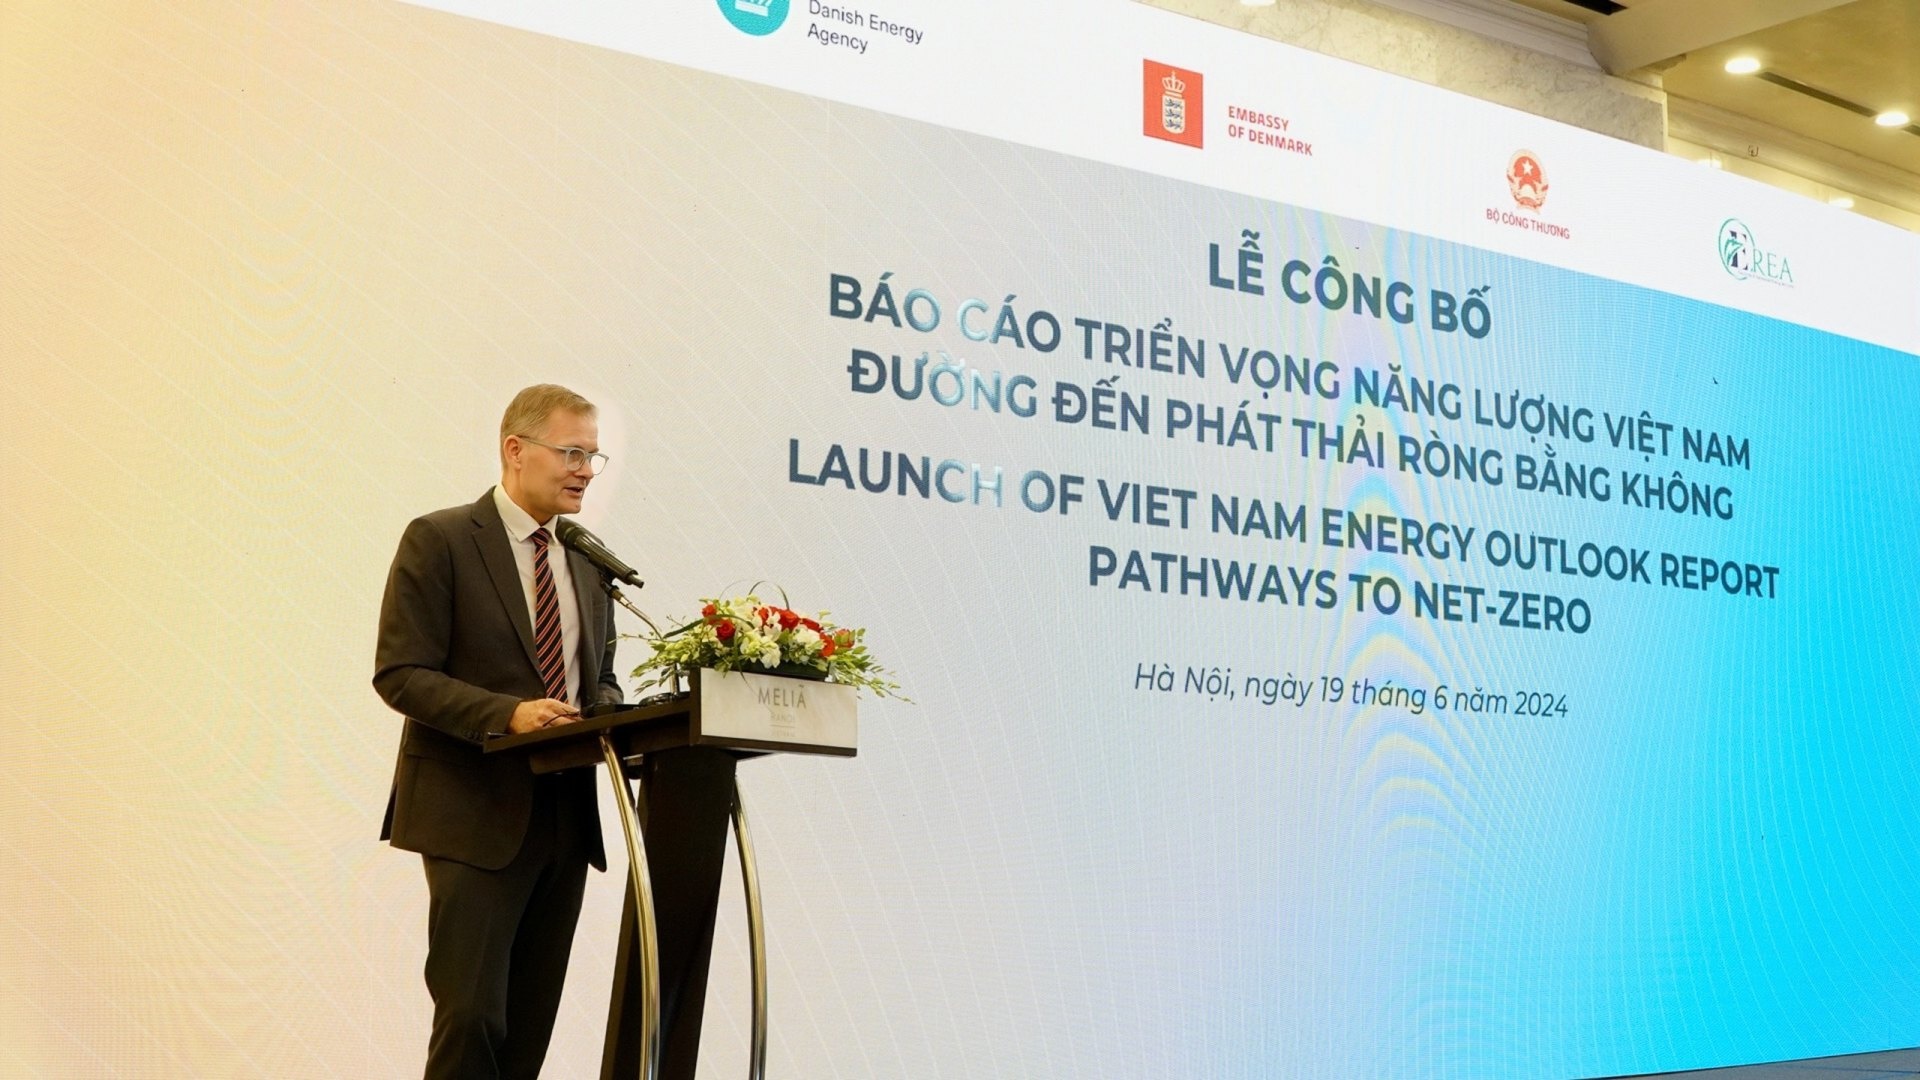 Investment in green energy transition vital for Vietnam